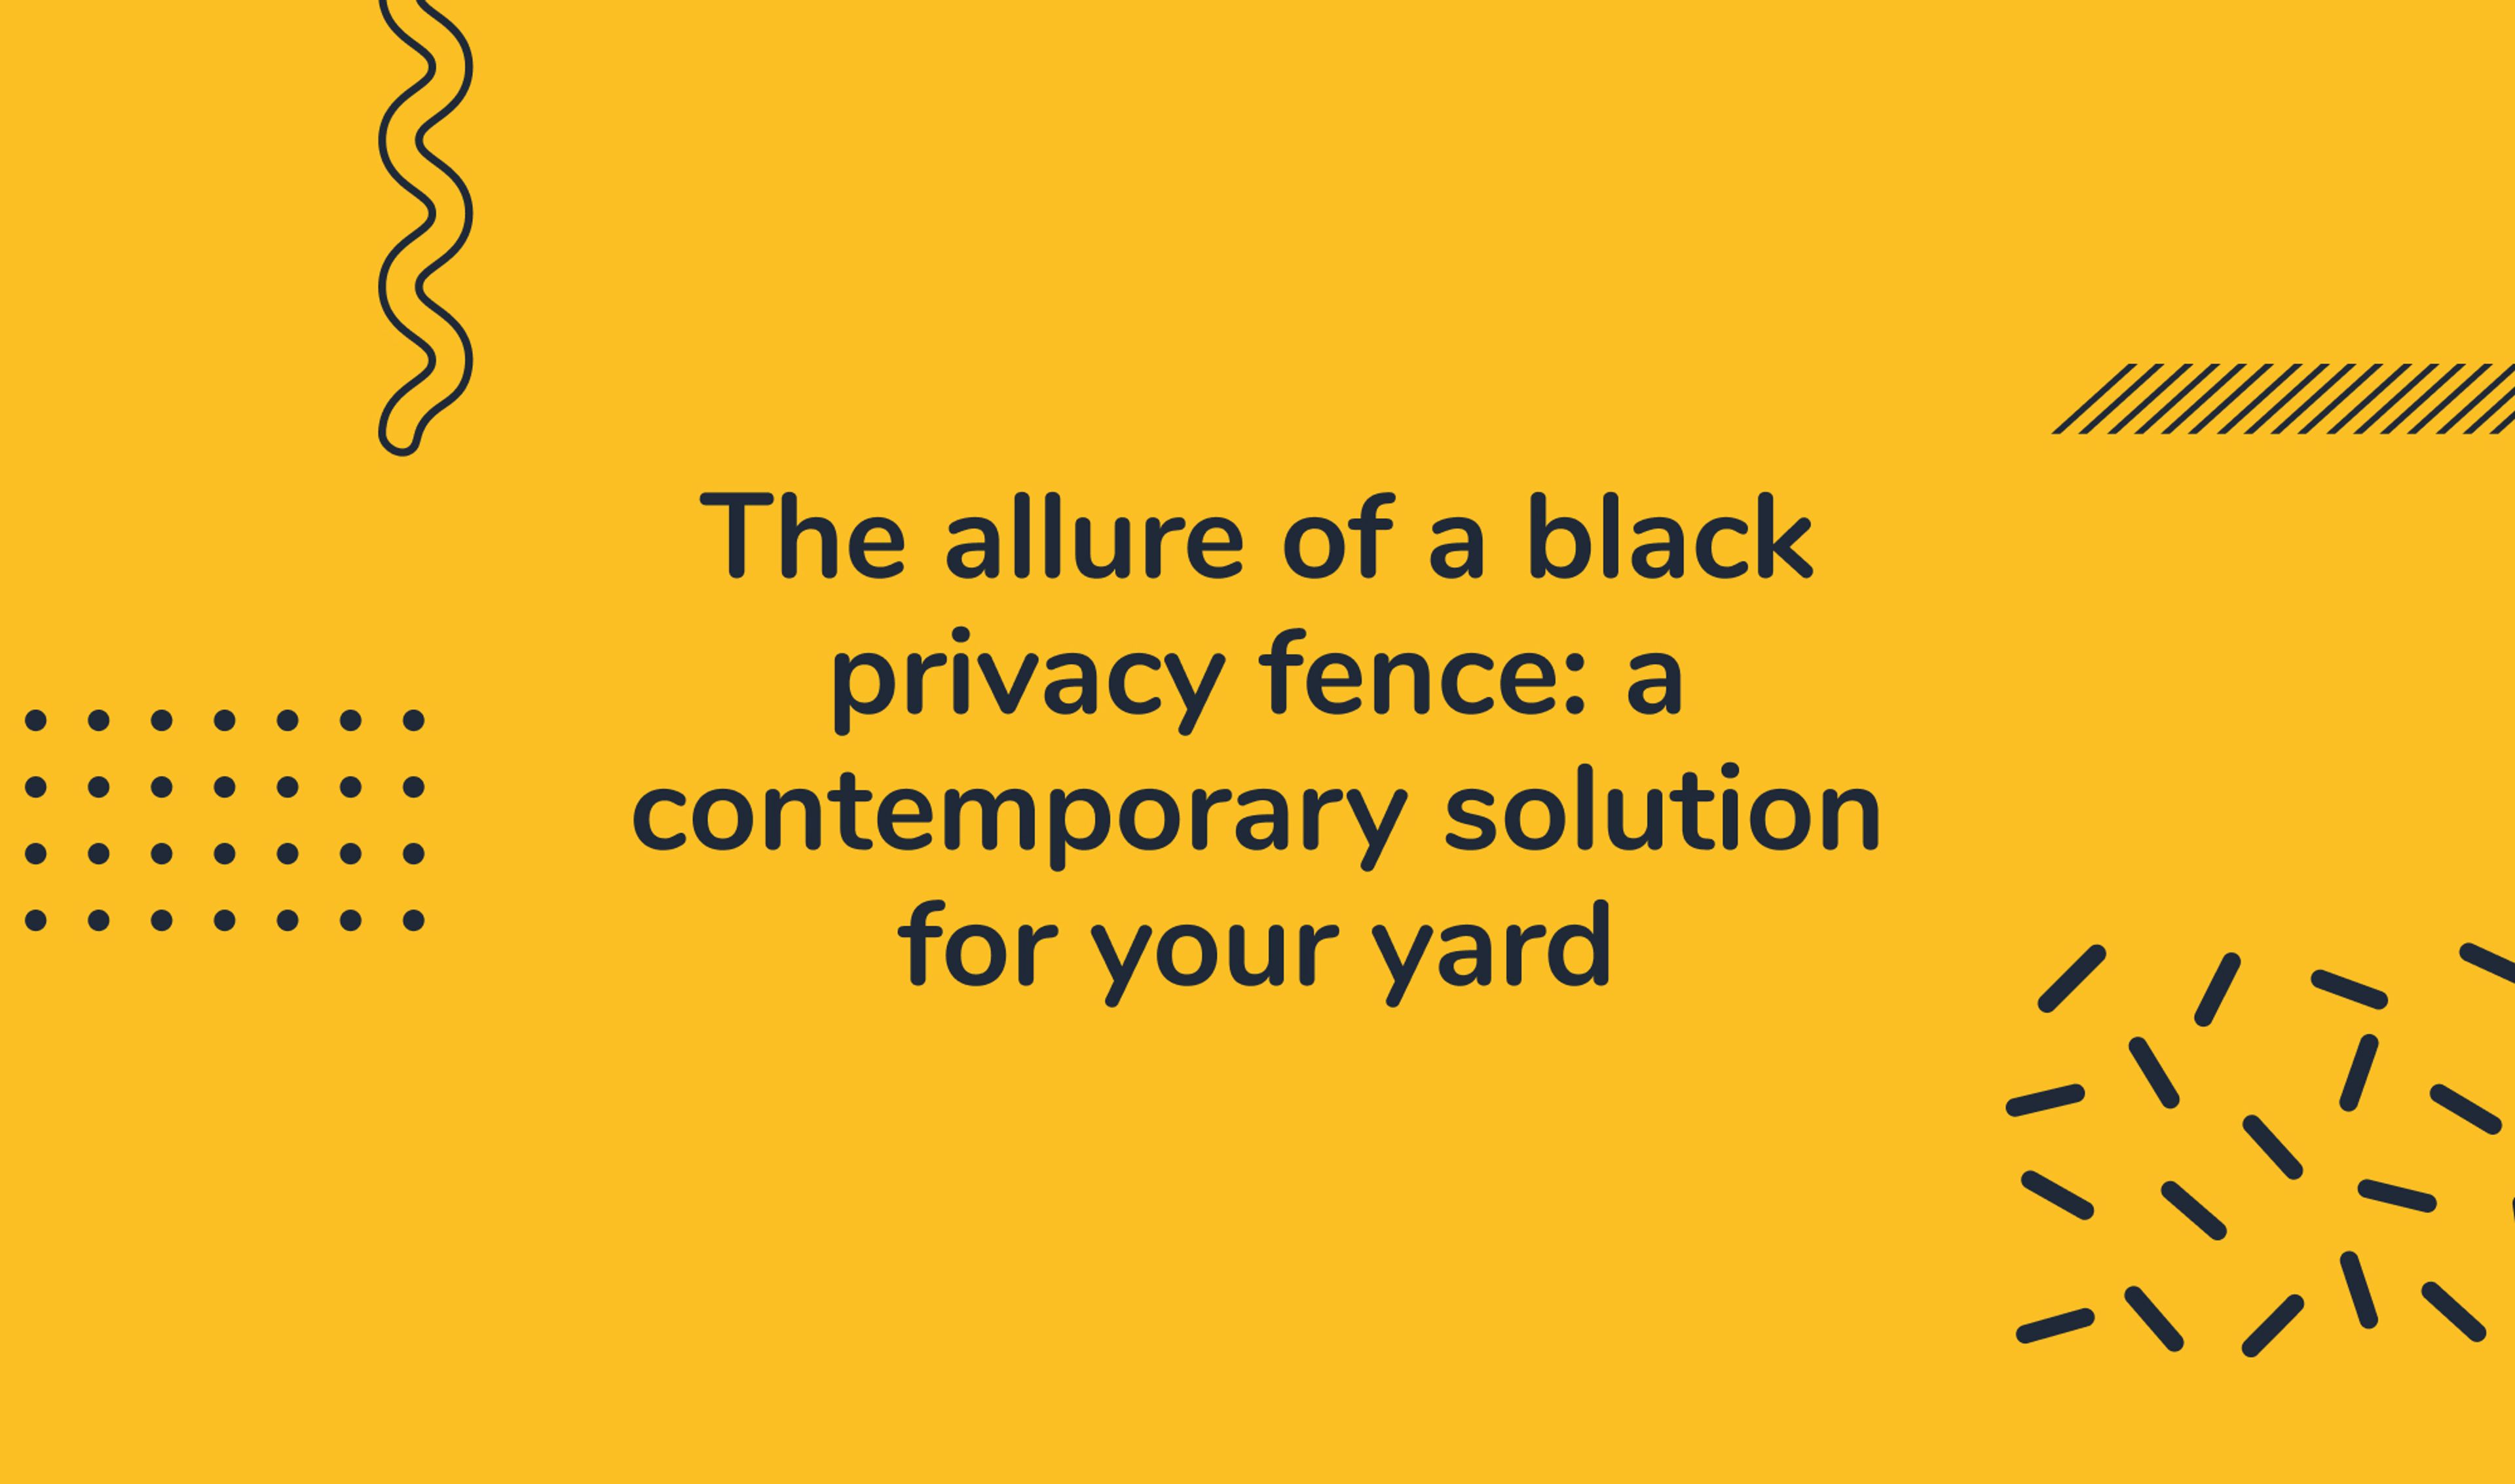 The allure of a black privacy fence: a contemporary solution for your yard